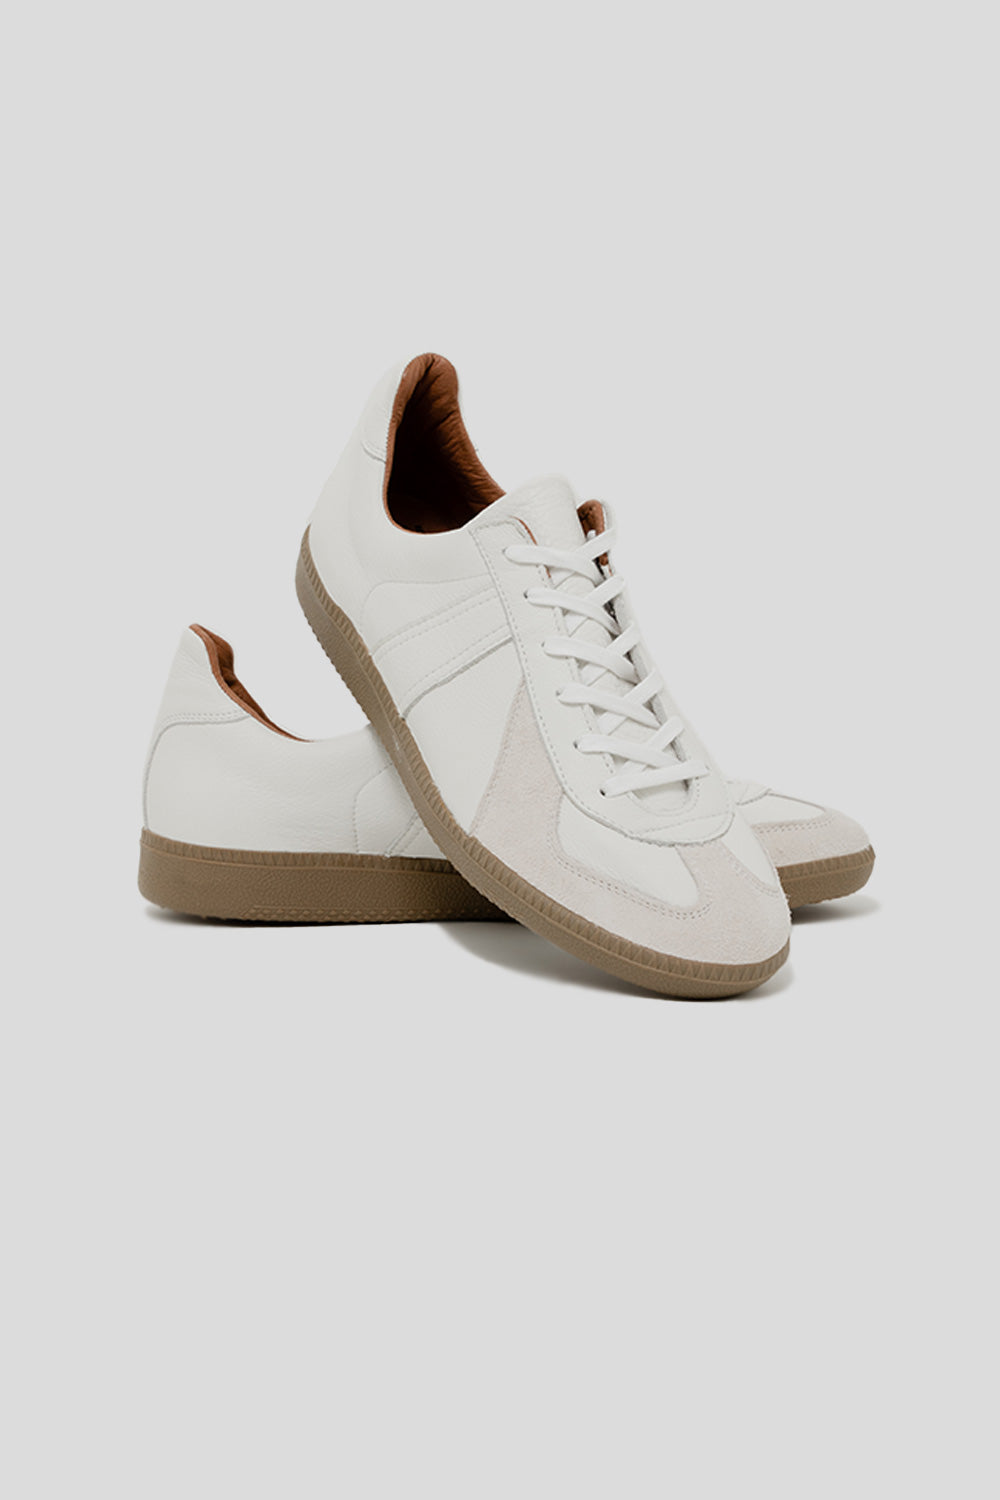 Reproduction of Found German Military Trainer Shoe in White